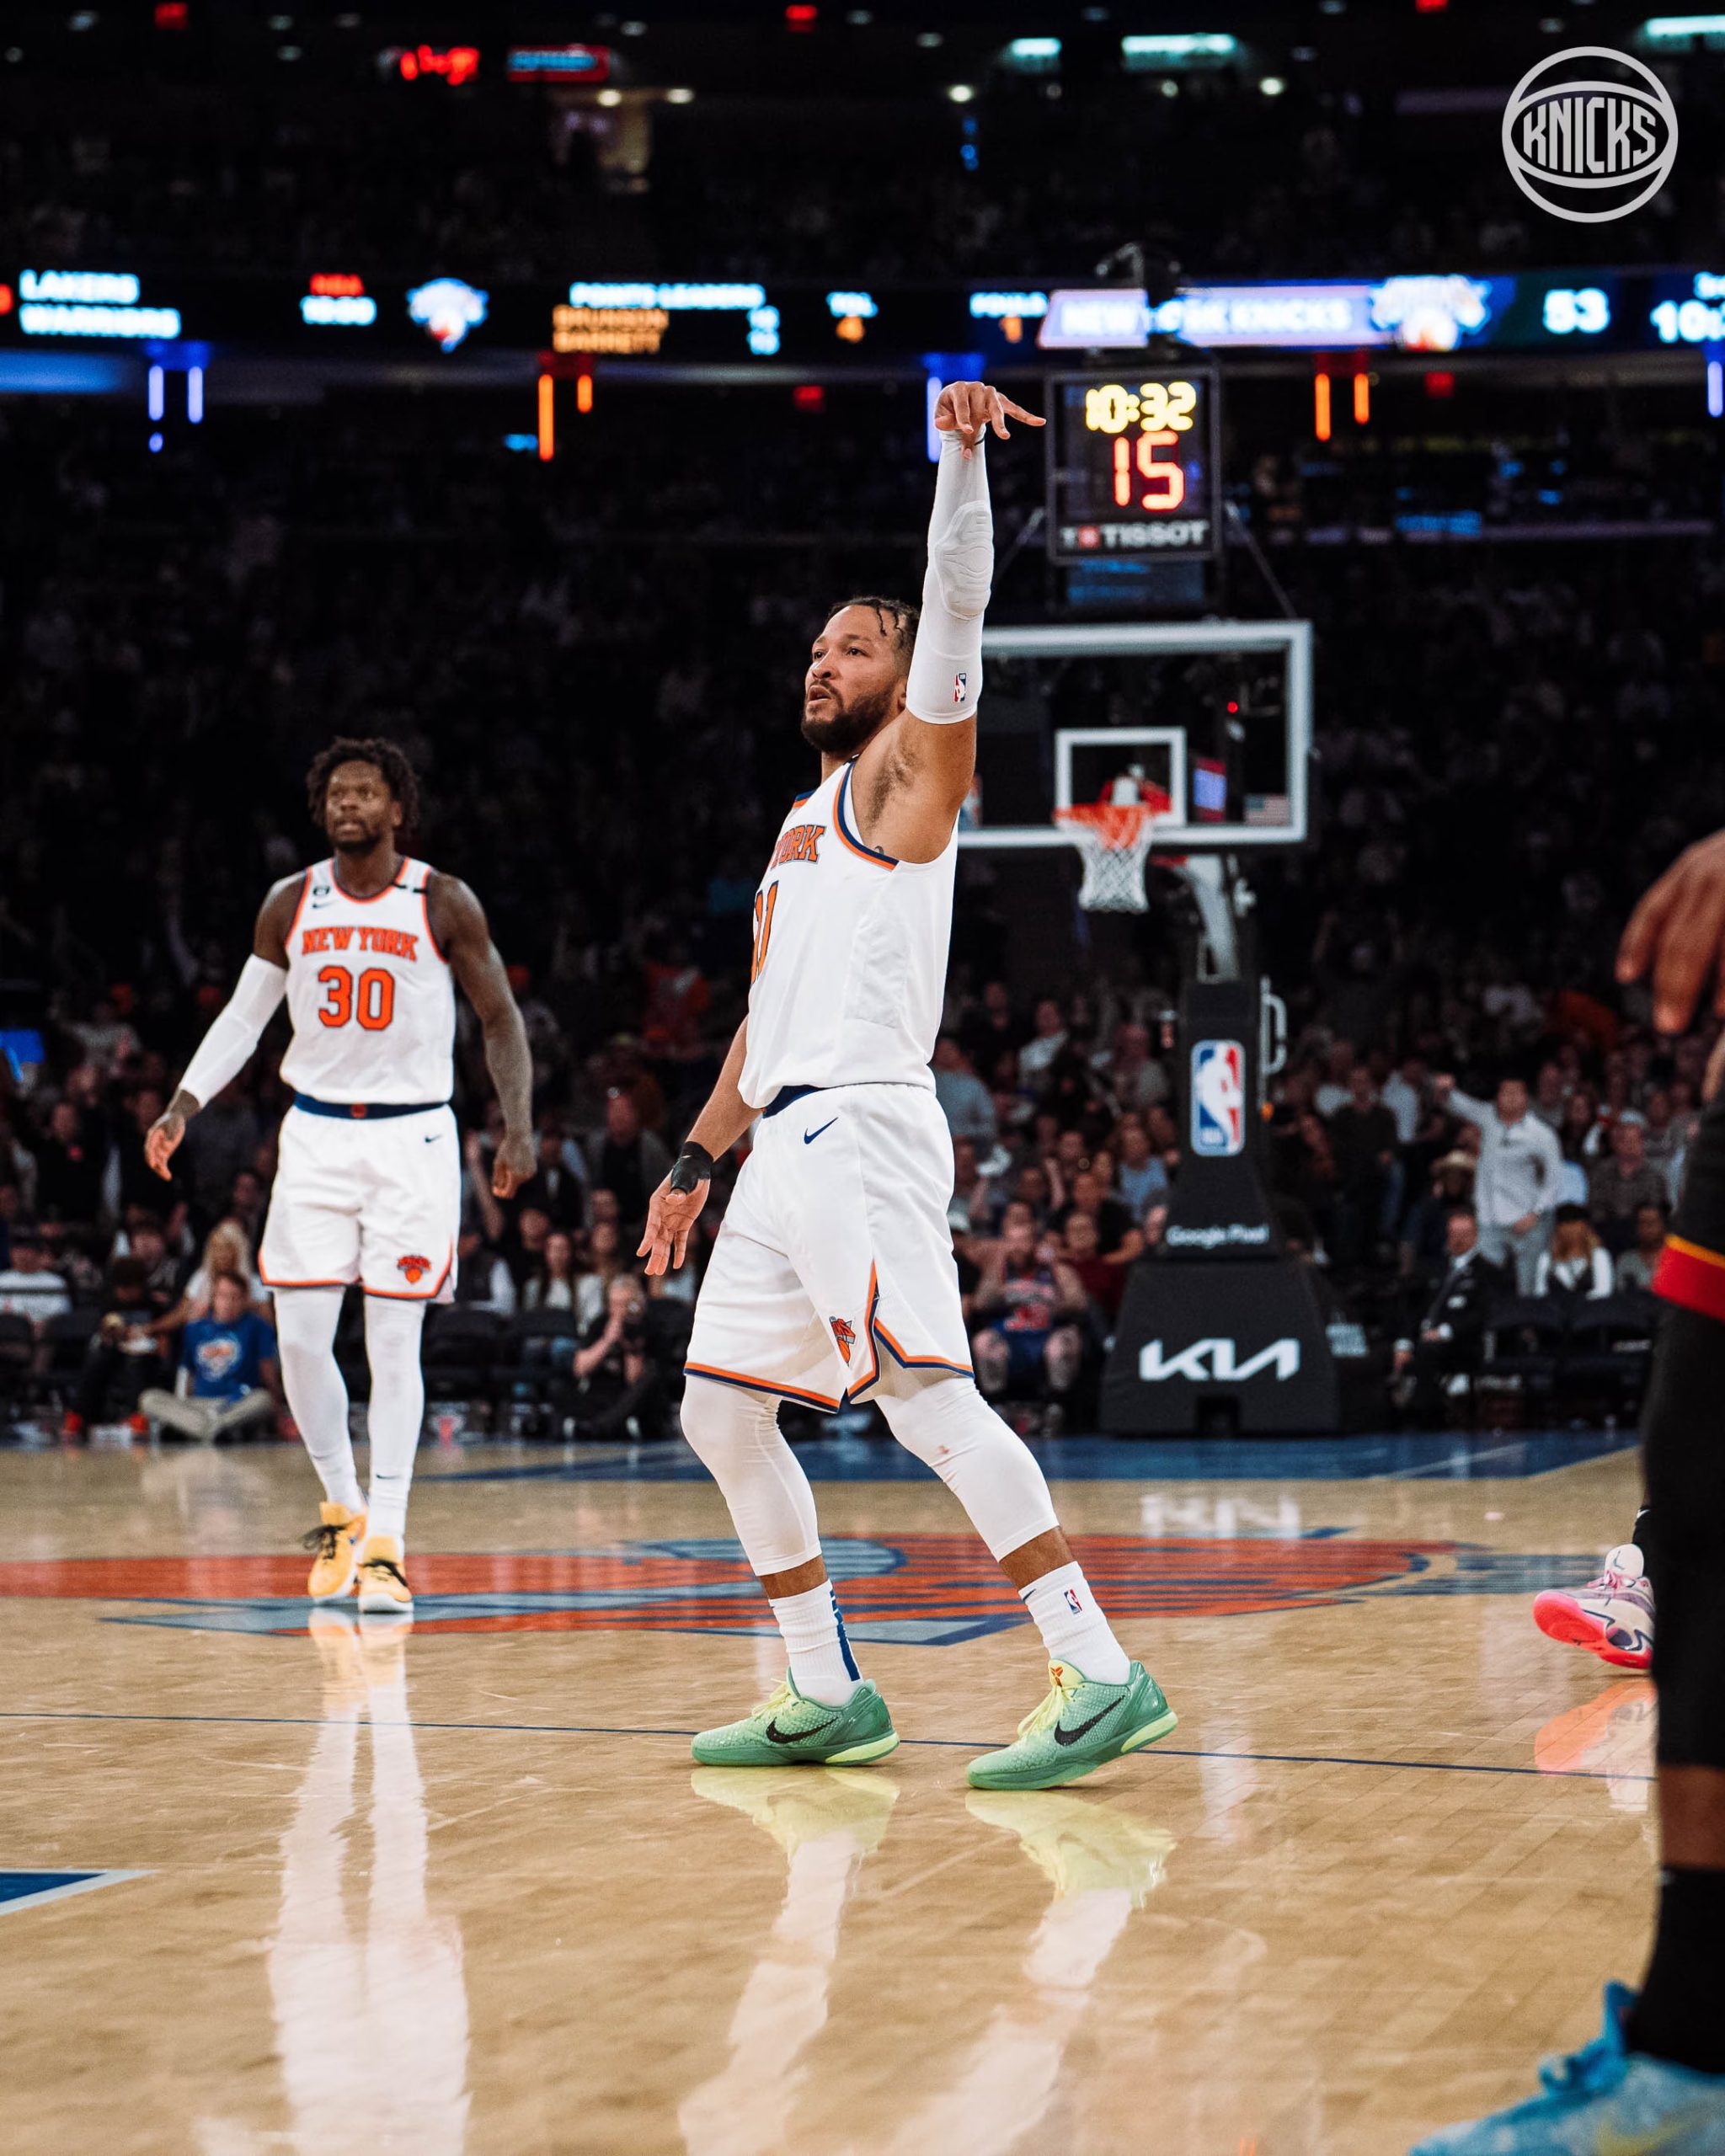 Building to Greatness: Previewing the Knicks’ Eventful Off-Season